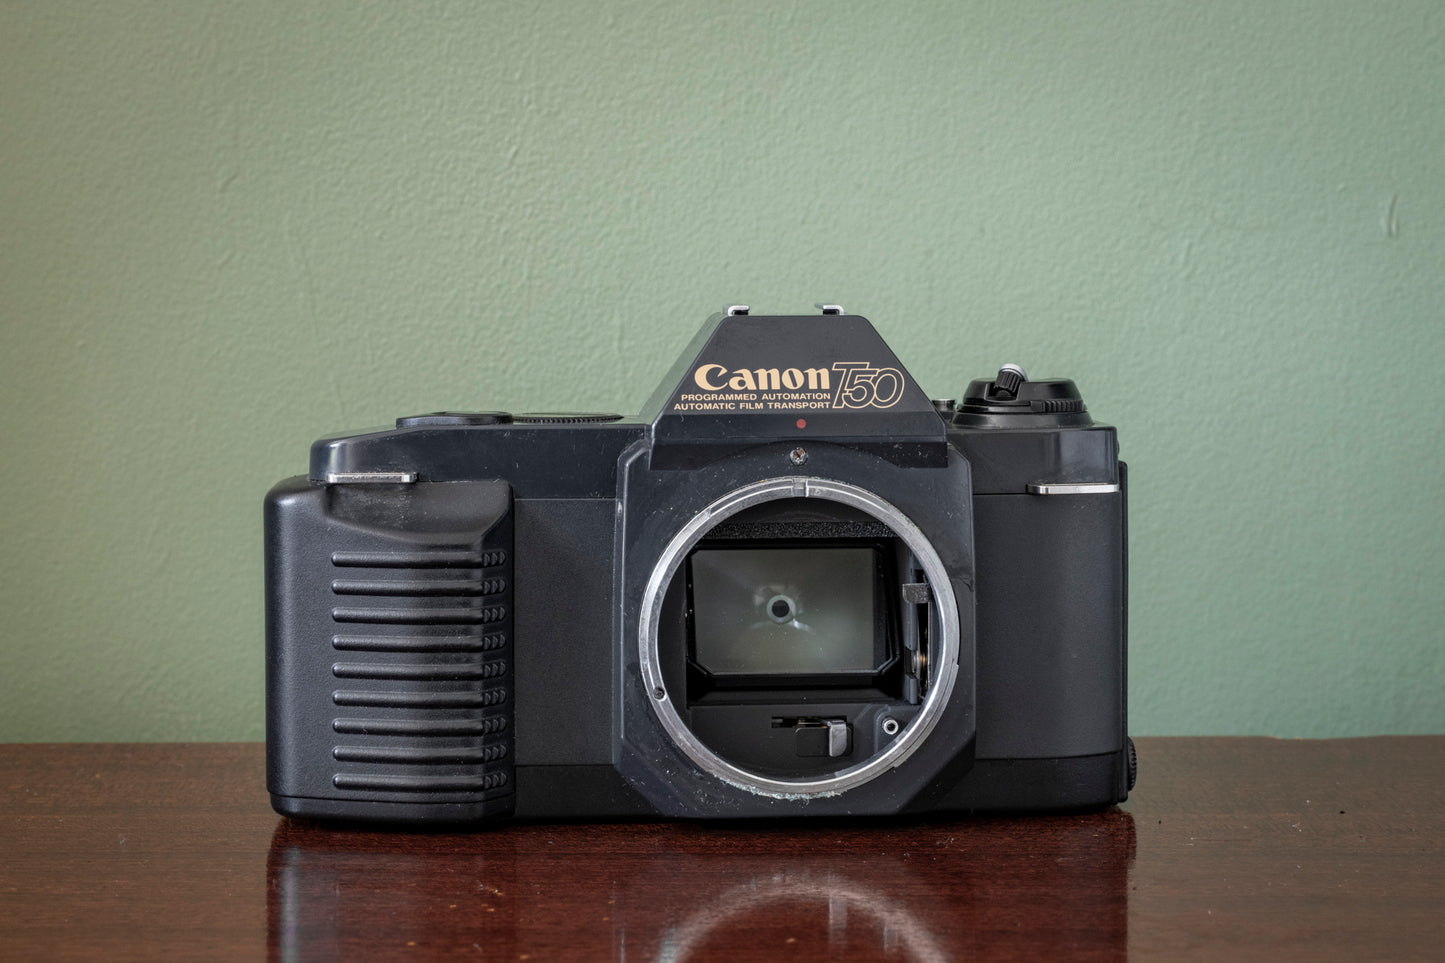 Canon T50 35mm SLR Film Camera with Tamron 28mm F2.5 Lens